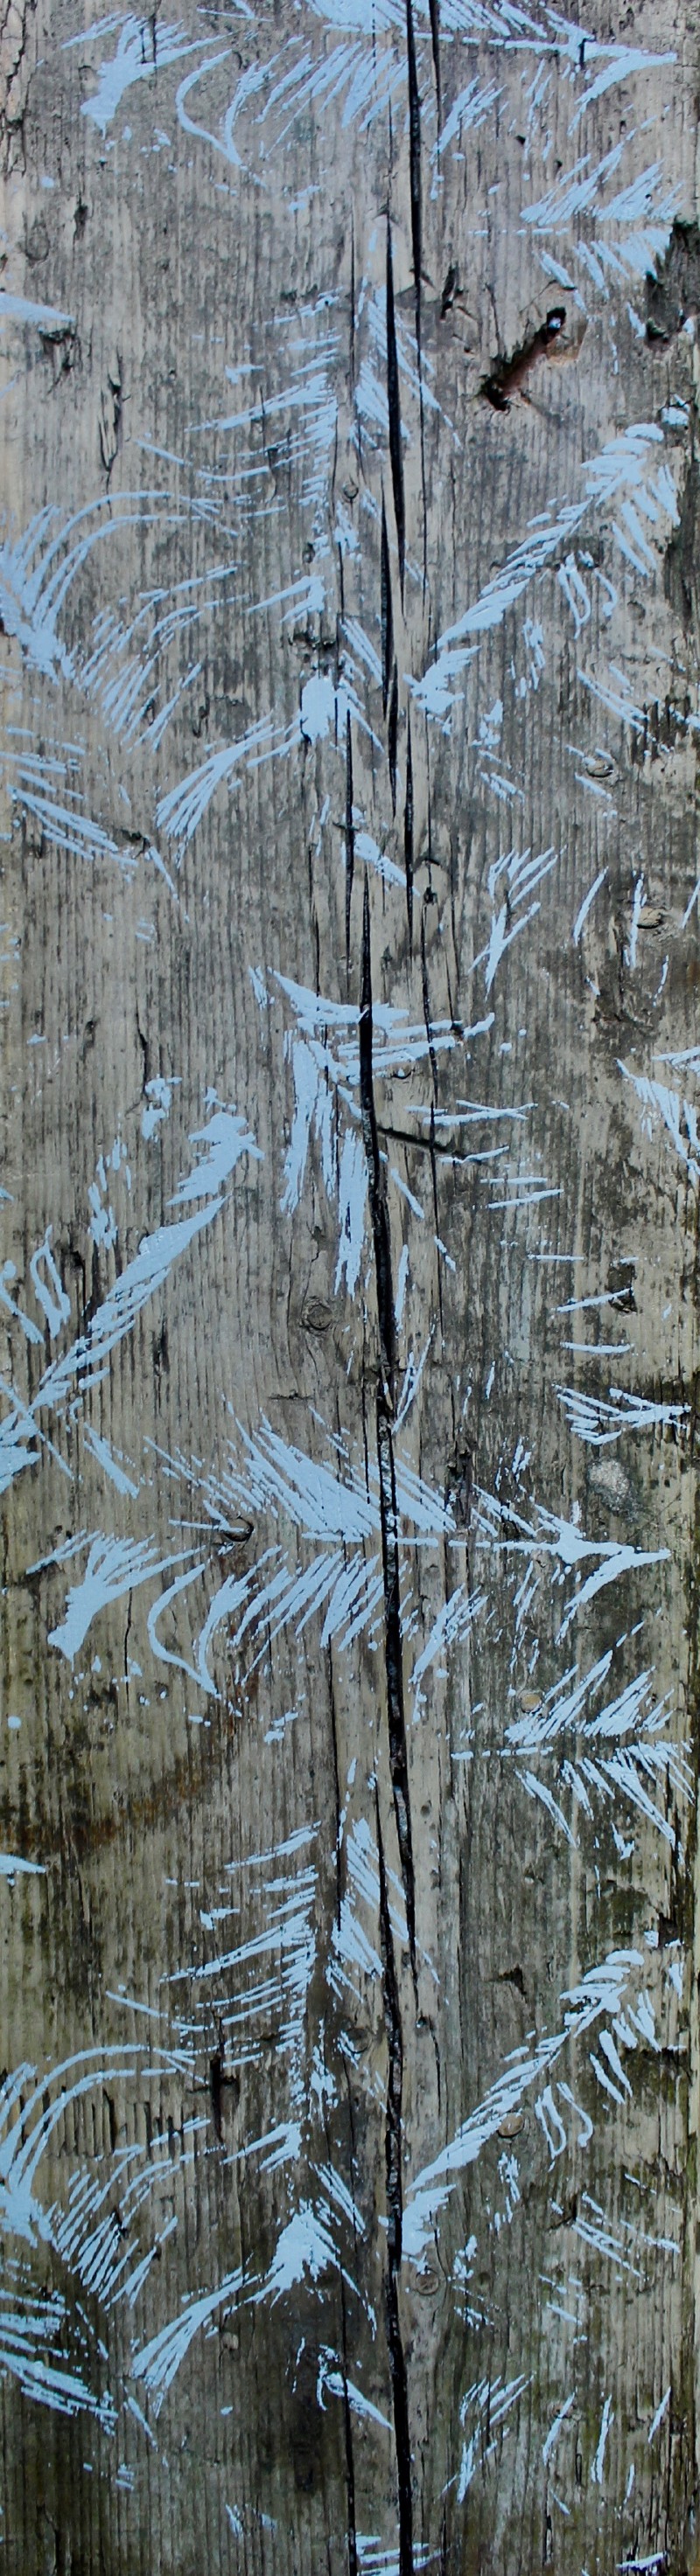 Weathered feathers